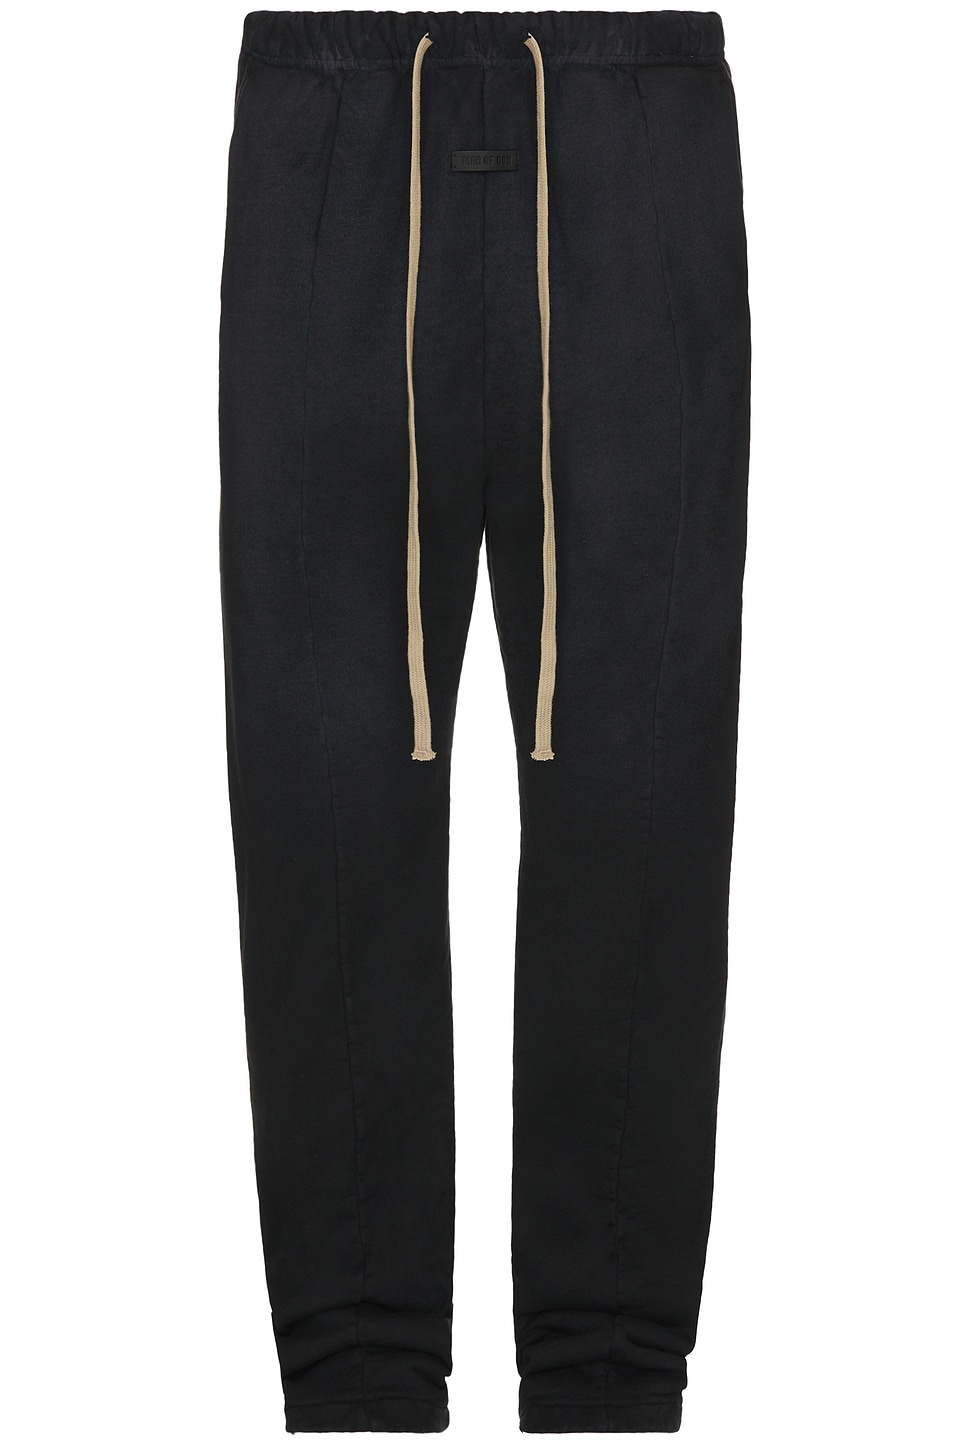 Image 1 of Fear of God Forum Sweatpant in Black